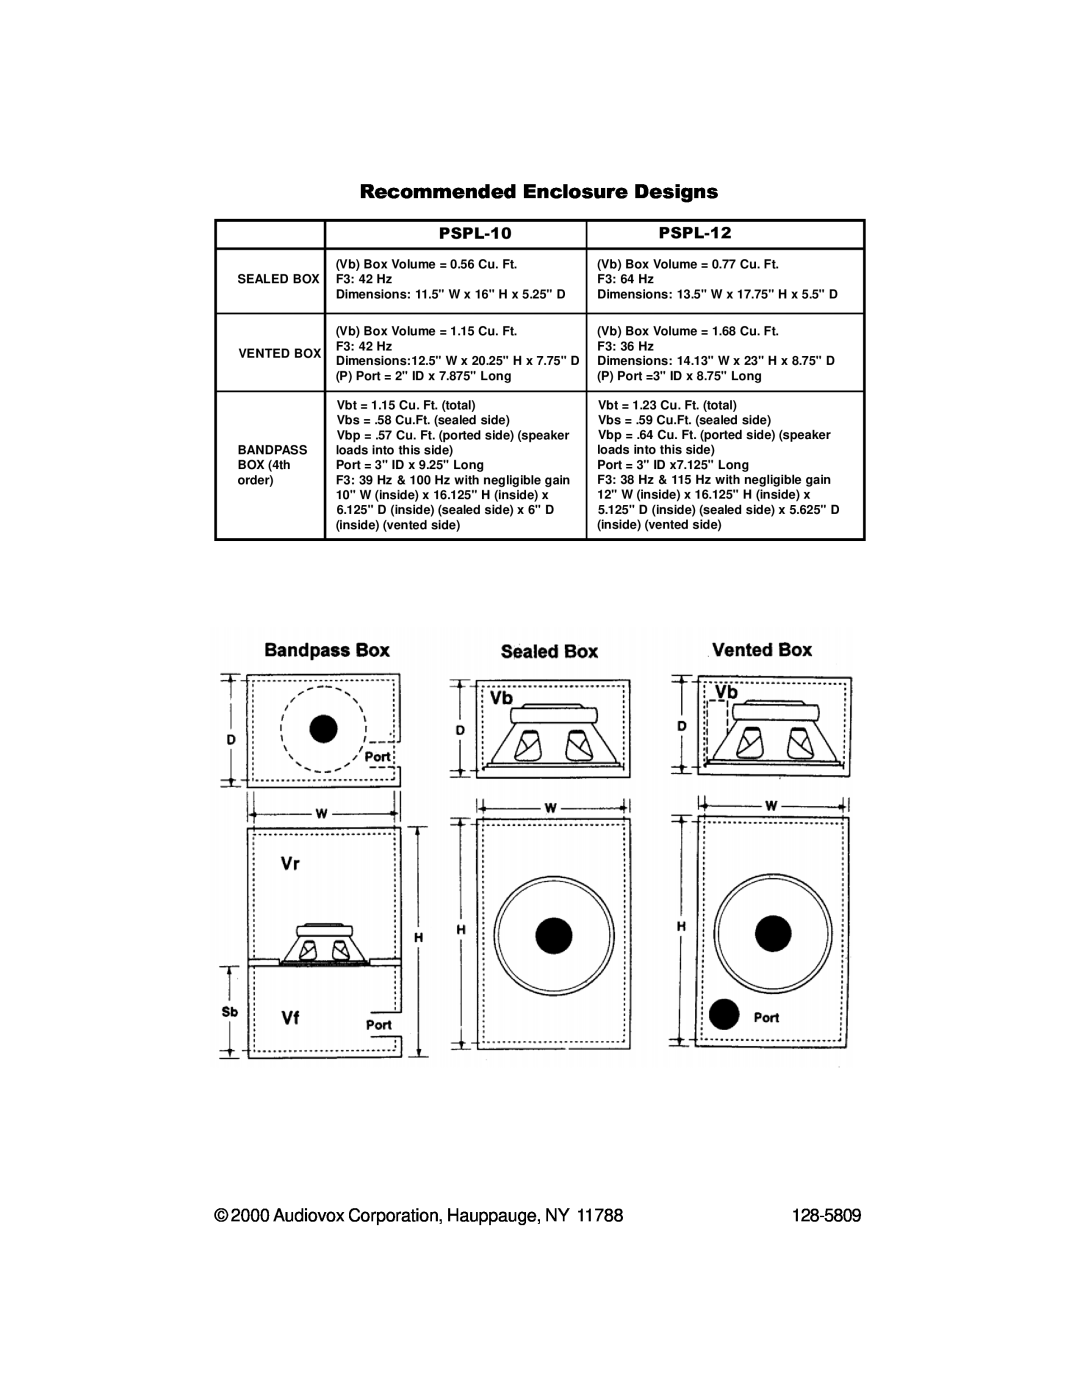 Audiovox PSPL-10, ACD12 manual Recommended Enclosure Designs, Audiovox Corporation, Hauppauge, NY, 128-5809, PSPL-12 